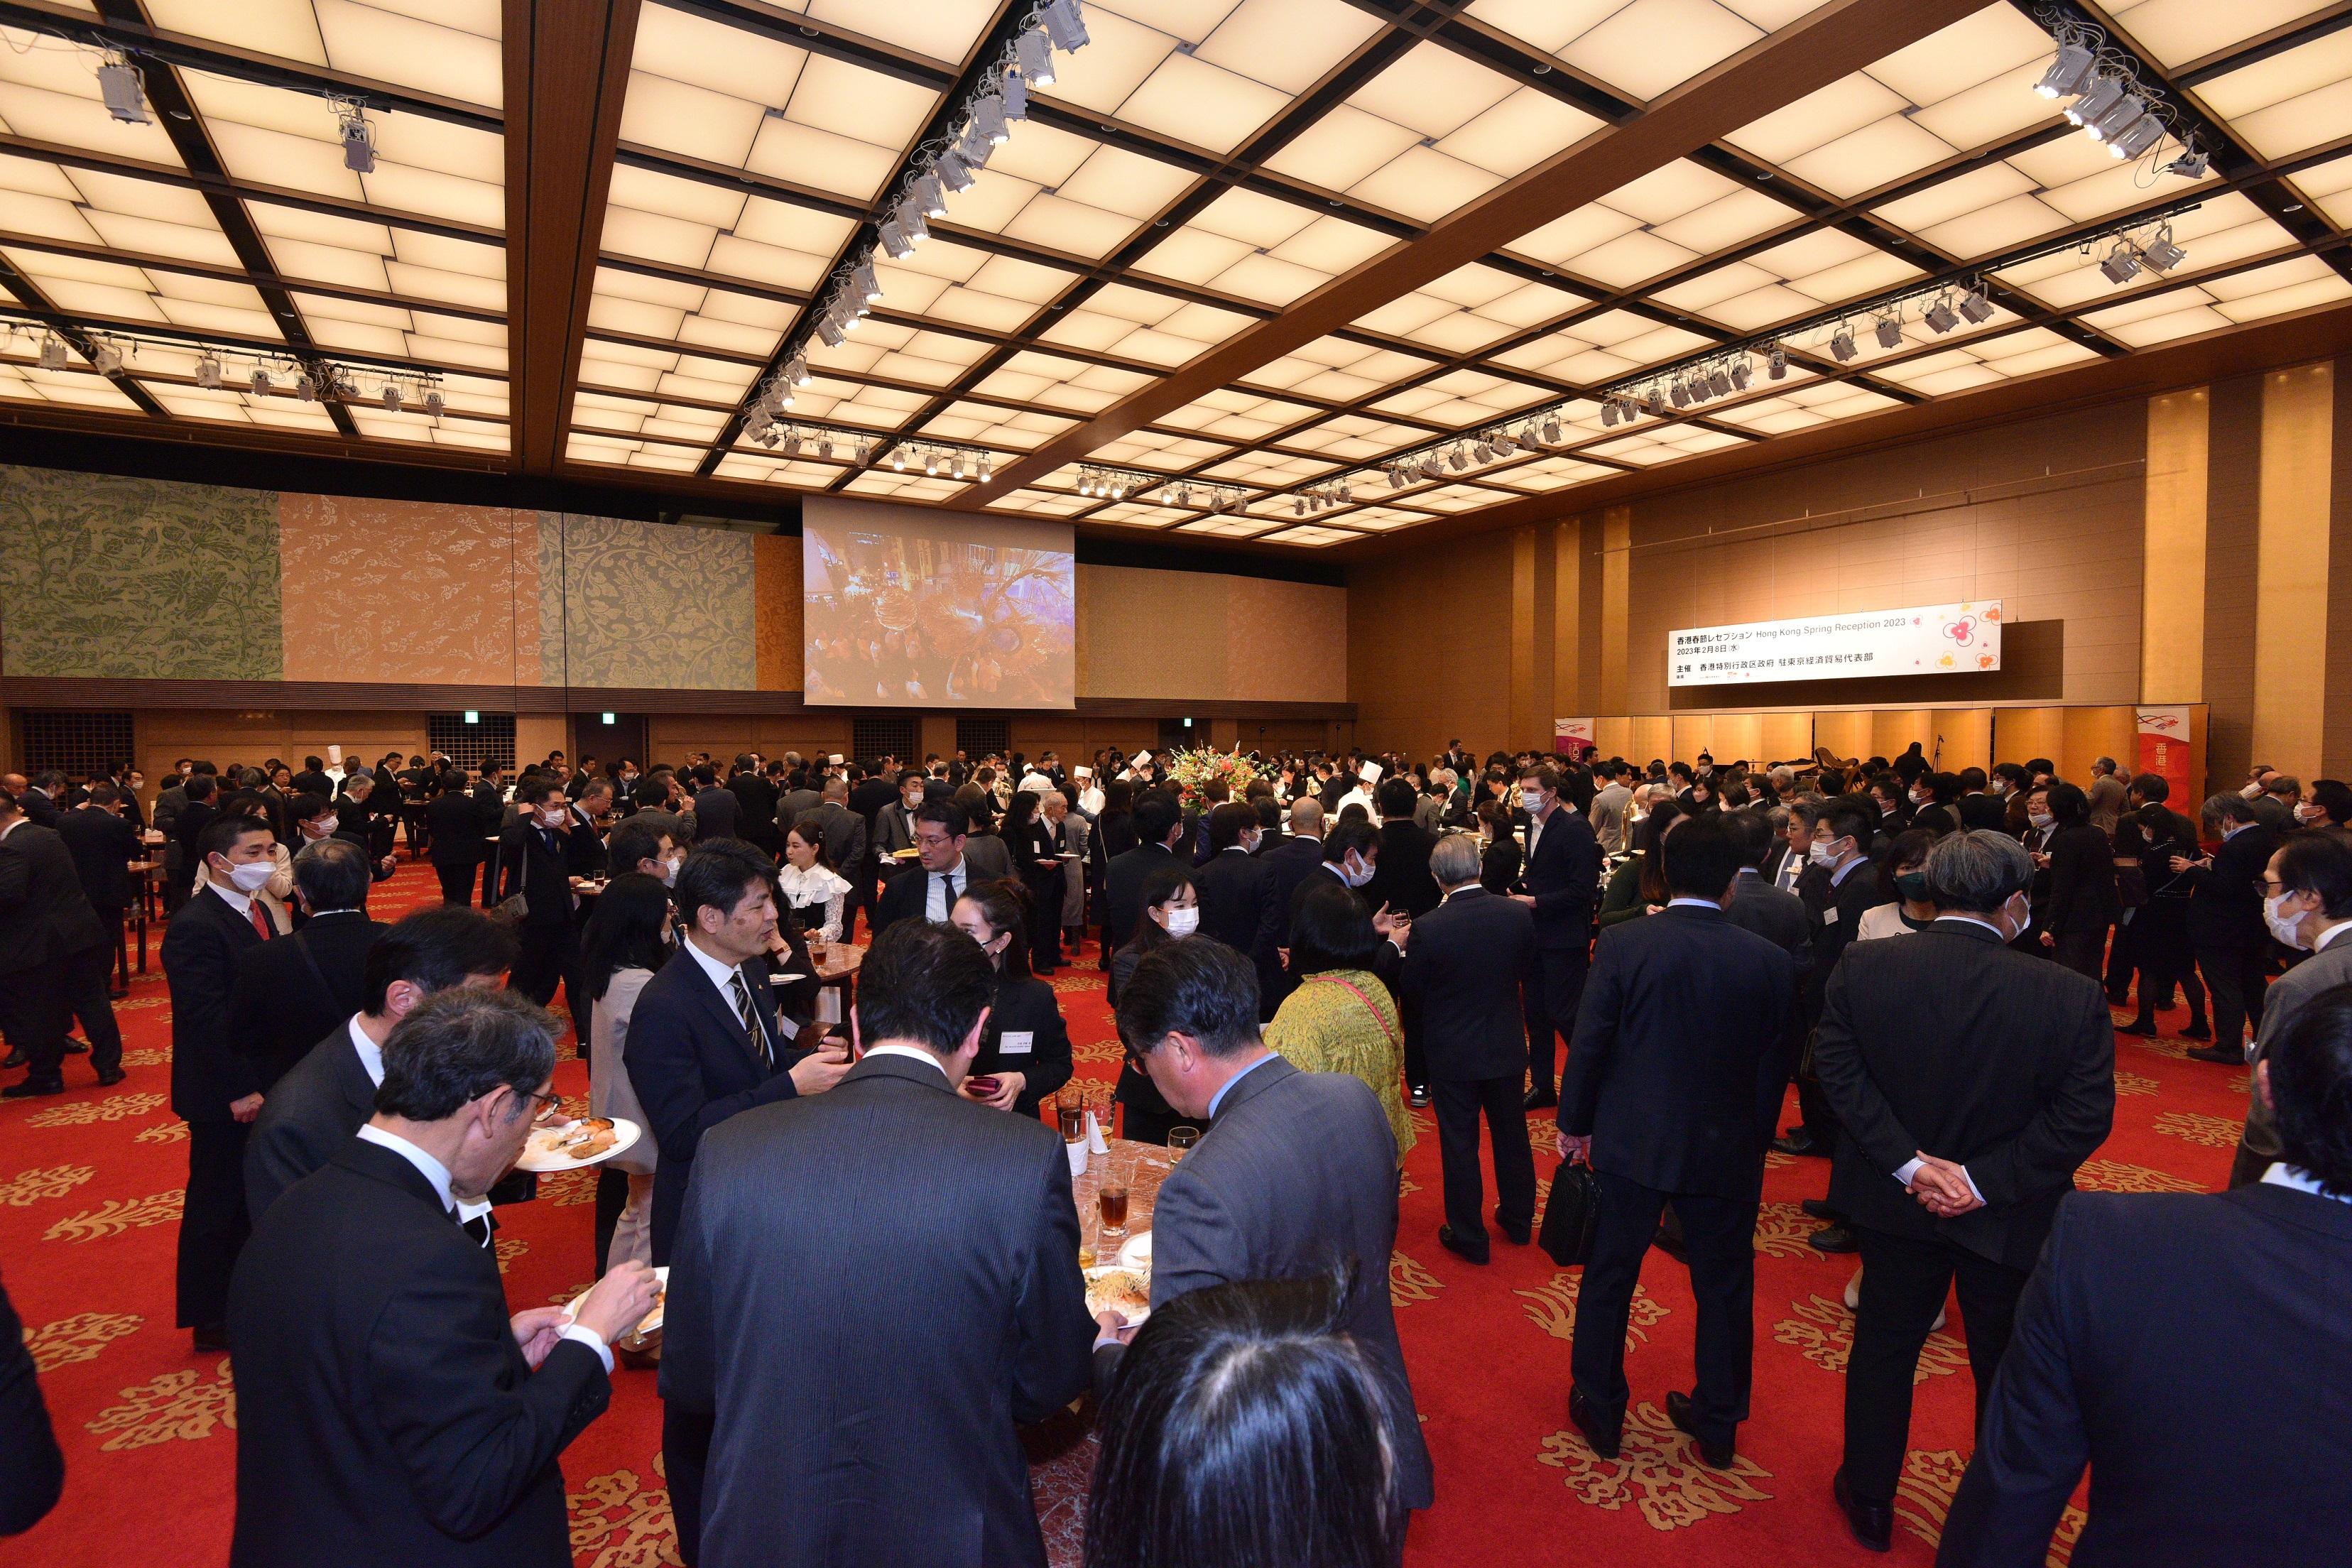 About 400 guests attended the spring reception held by the Hong Kong Economic and Trade Office (Tokyo) today (February 8).